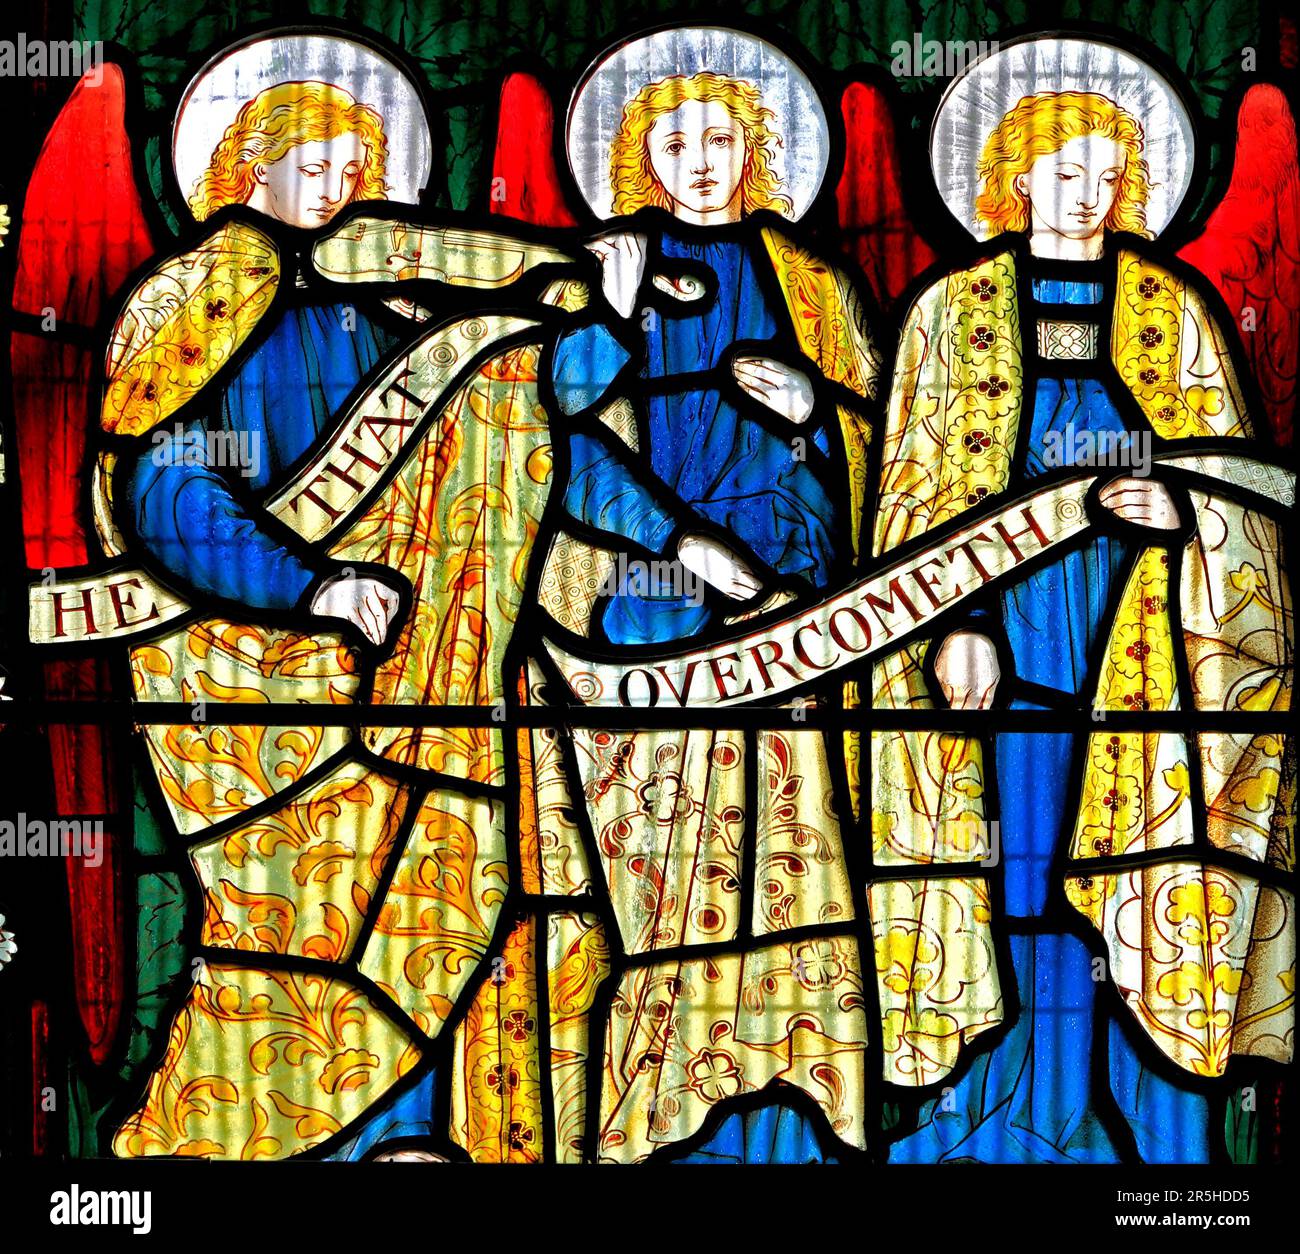 Angels, stained glass window, by Henry Holliday, 1873, pre-Raphaelite style, Stanhoe church, Norfolk, England, UK Stock Photo